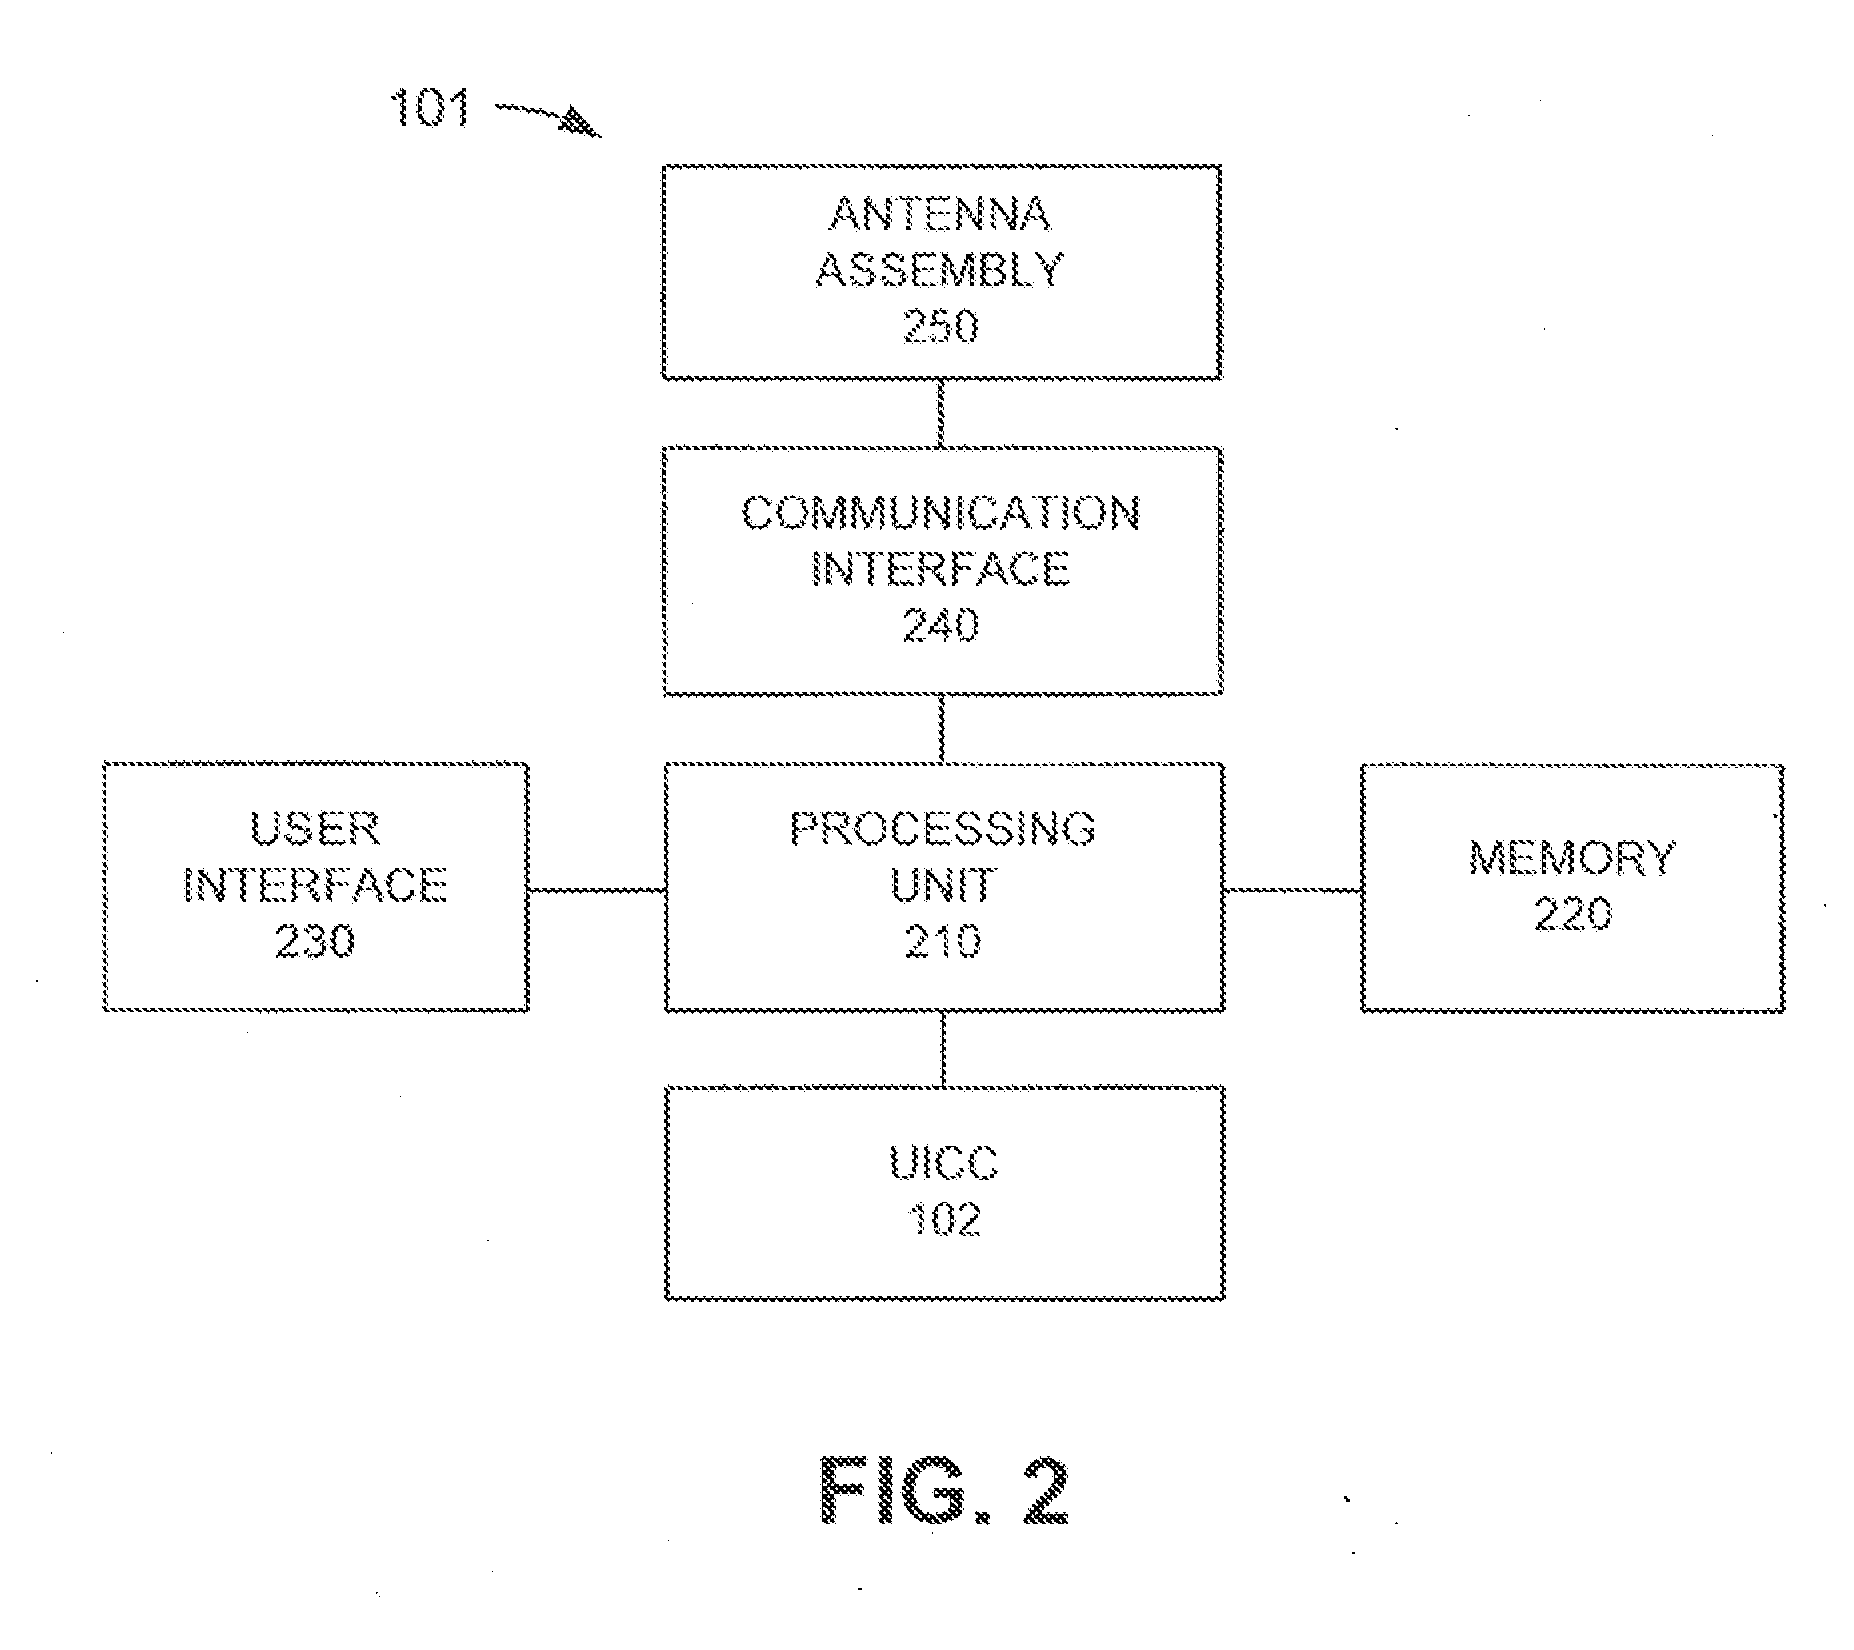 Universal integrated circuit card activation in a hybrid network